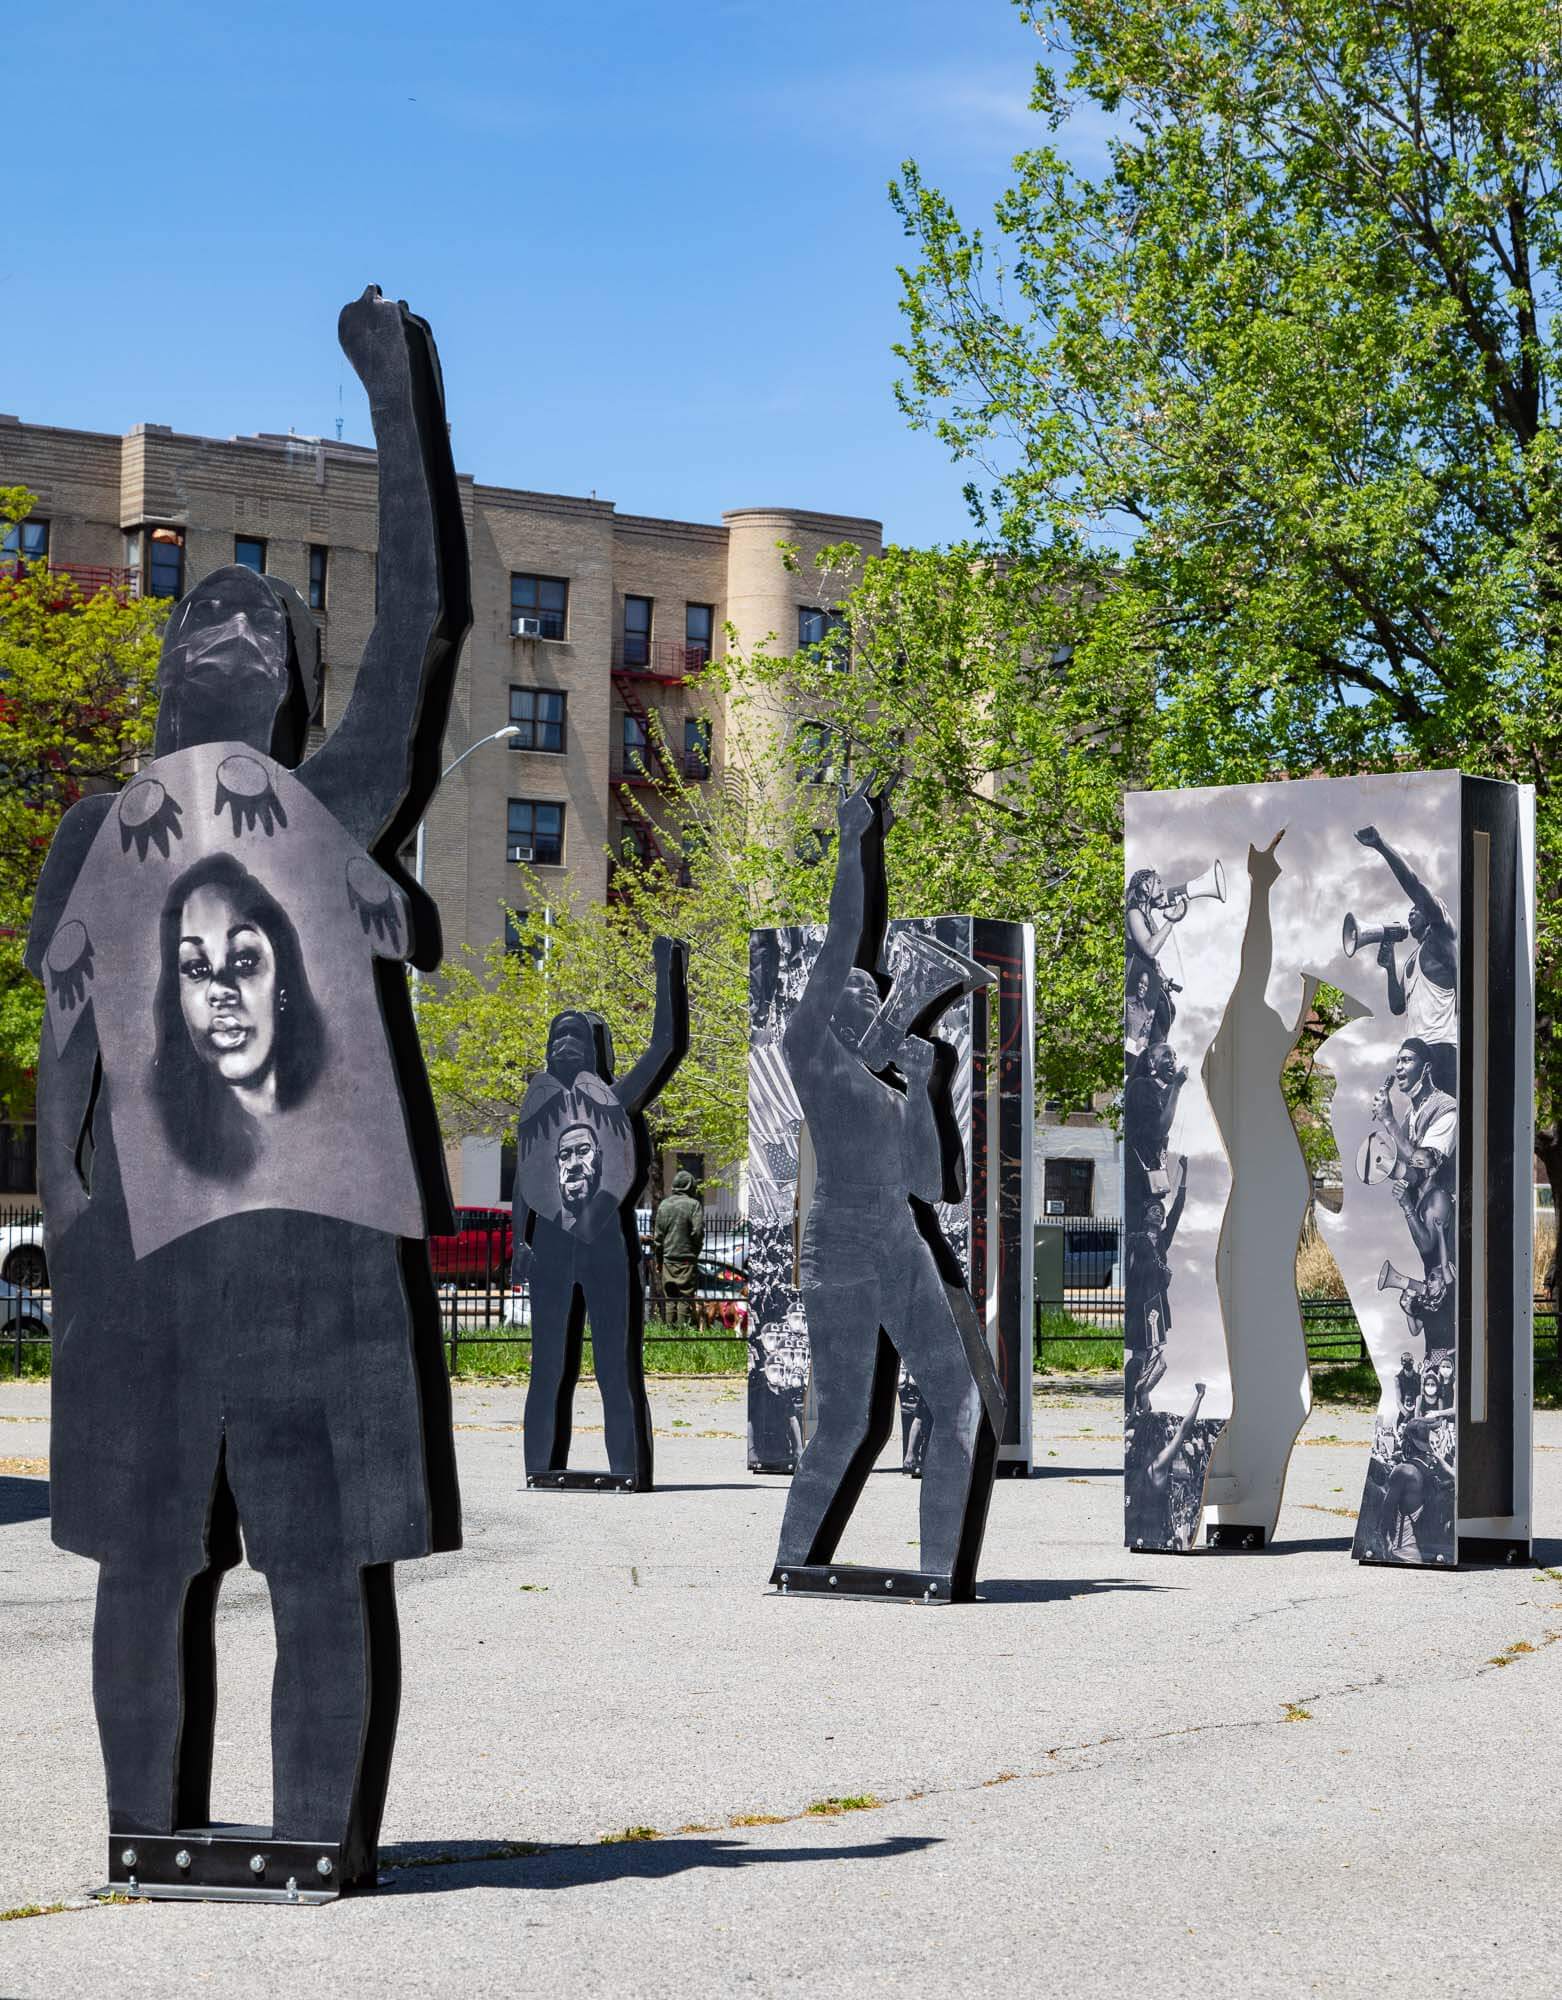 a collection of life-sized plywood cut-out figures representing protestors